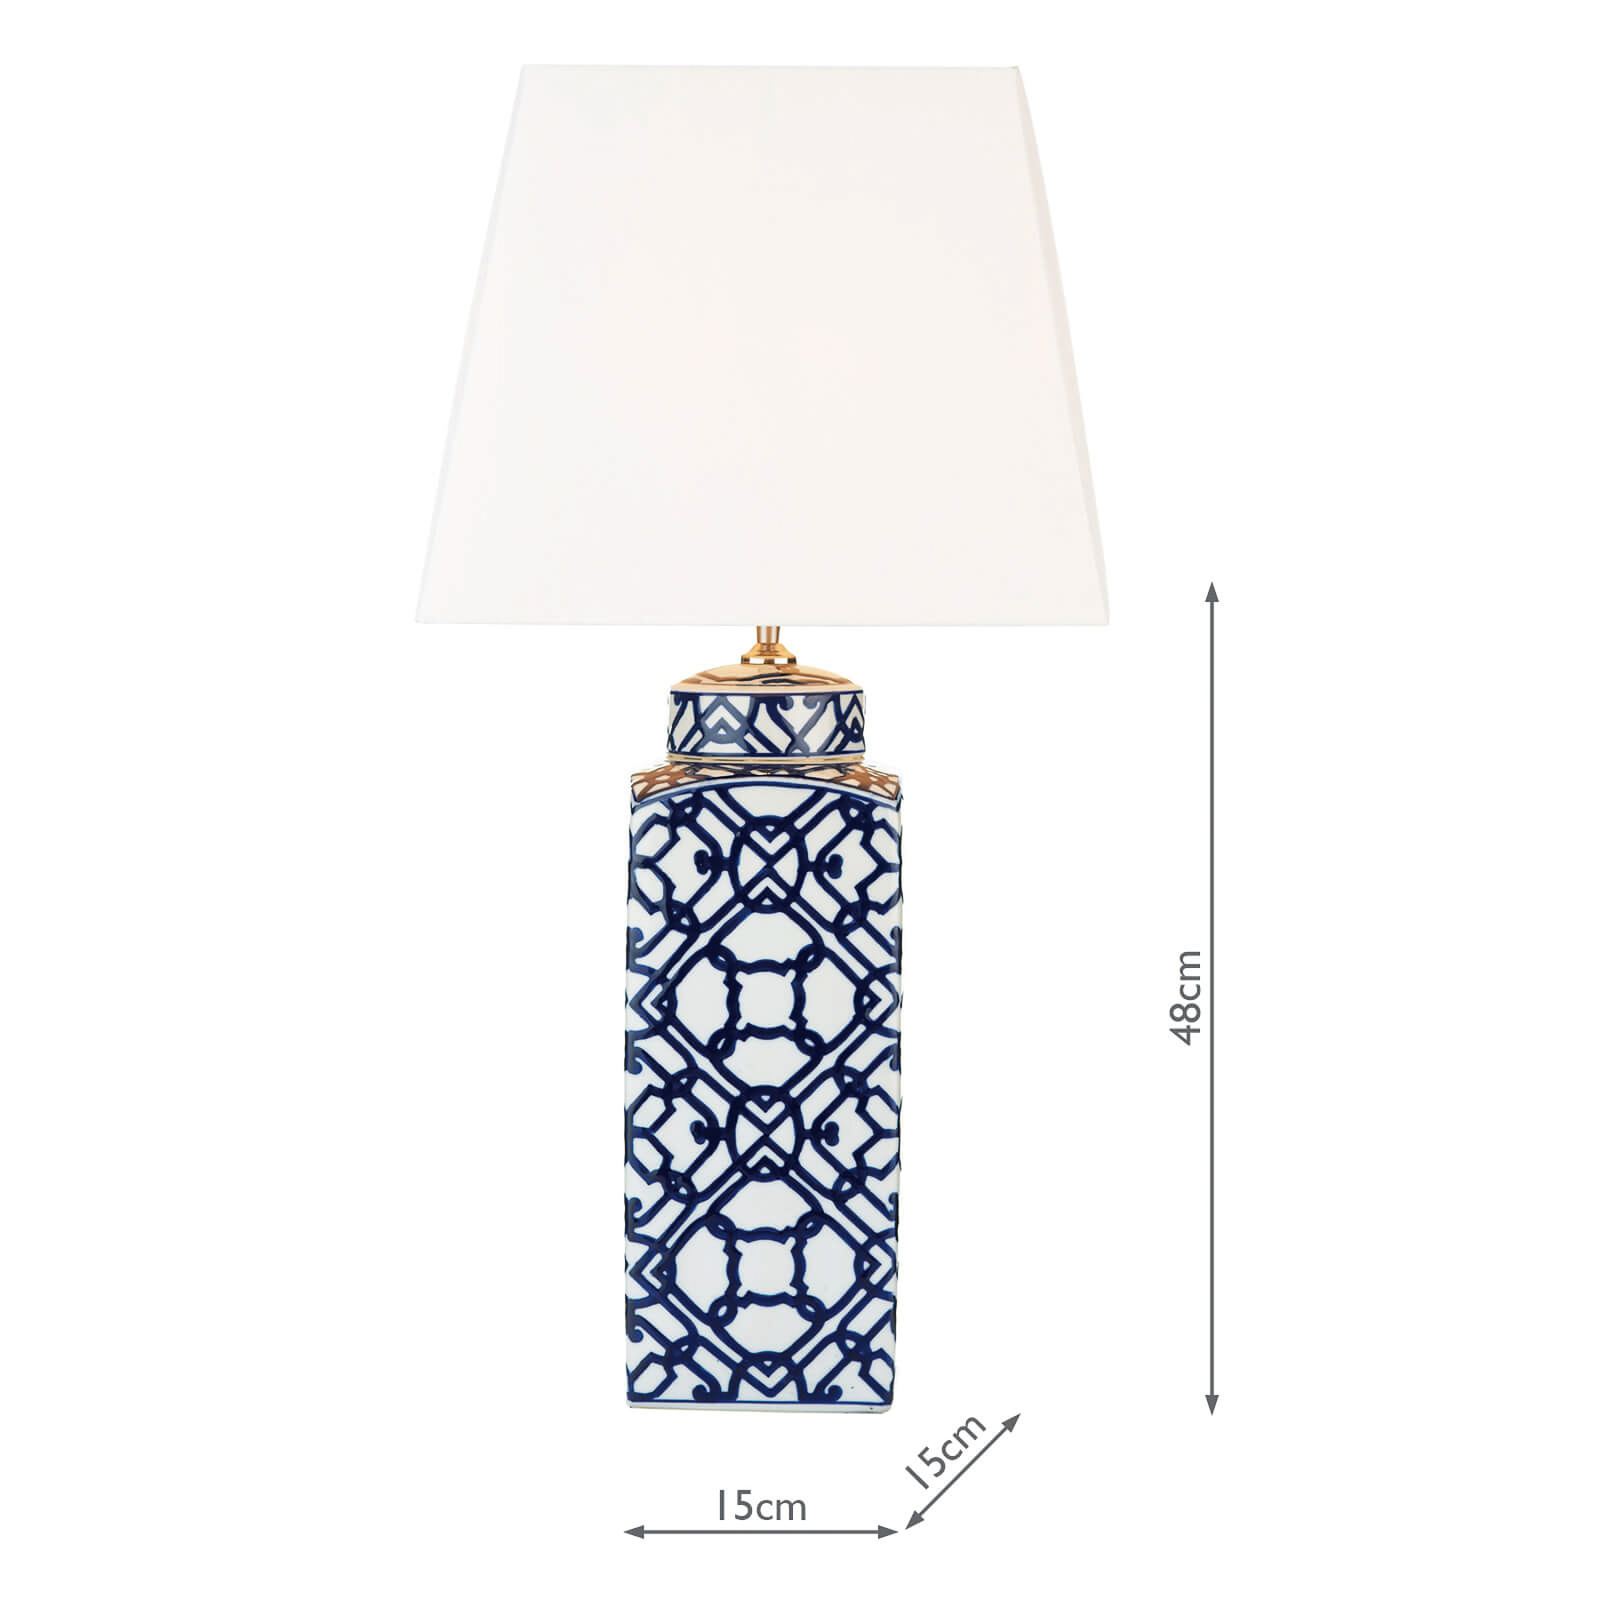 Mystic table lamp, blue and white ceramic base